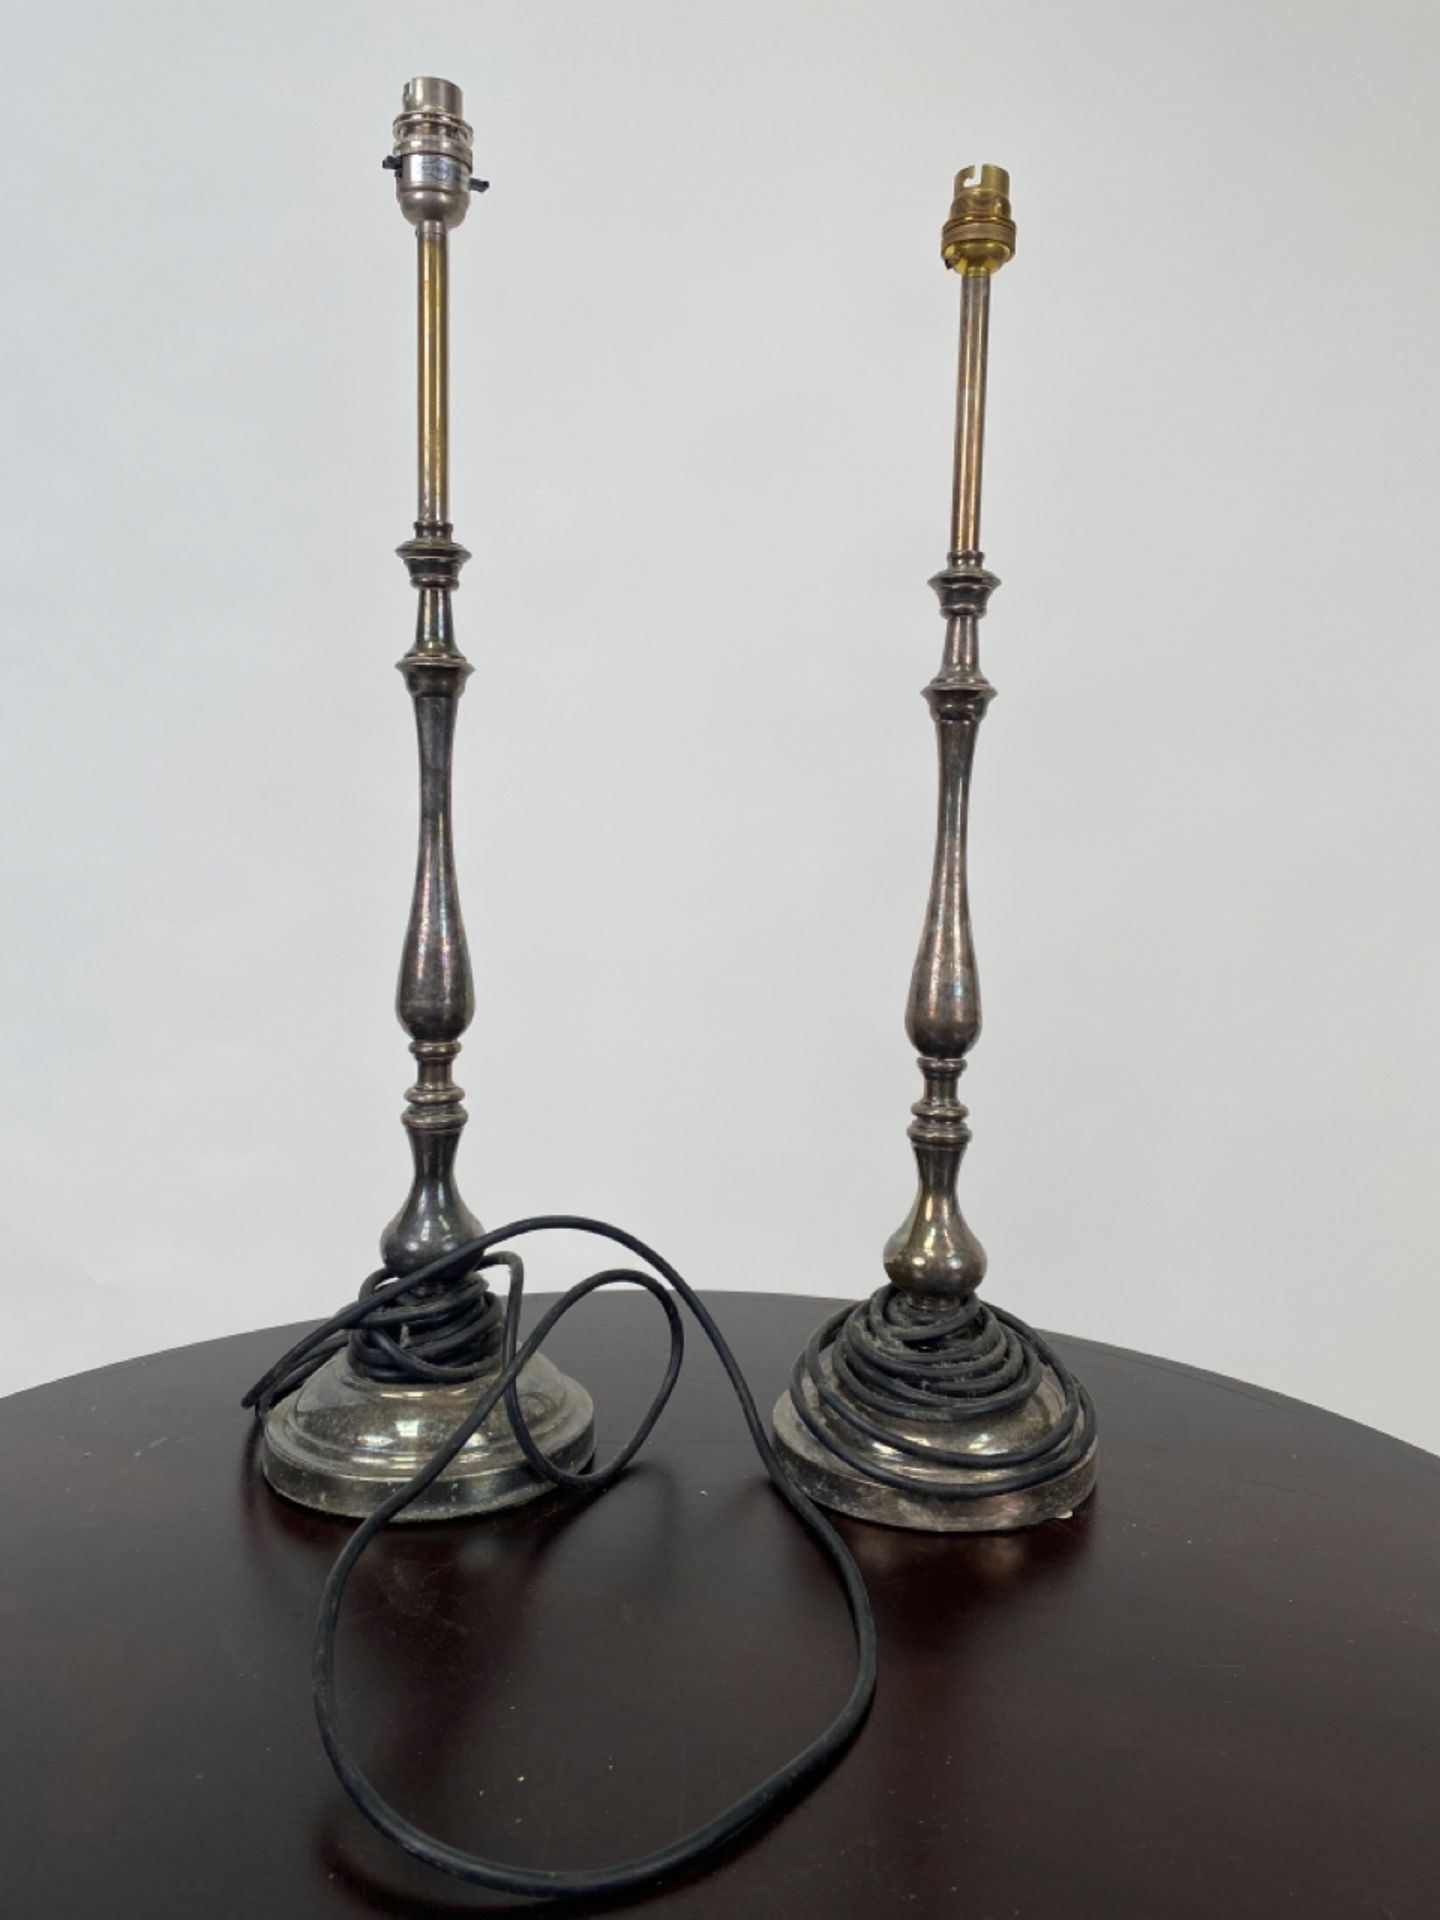 Pair of Nickel Plated Table Lamps - Image 2 of 4